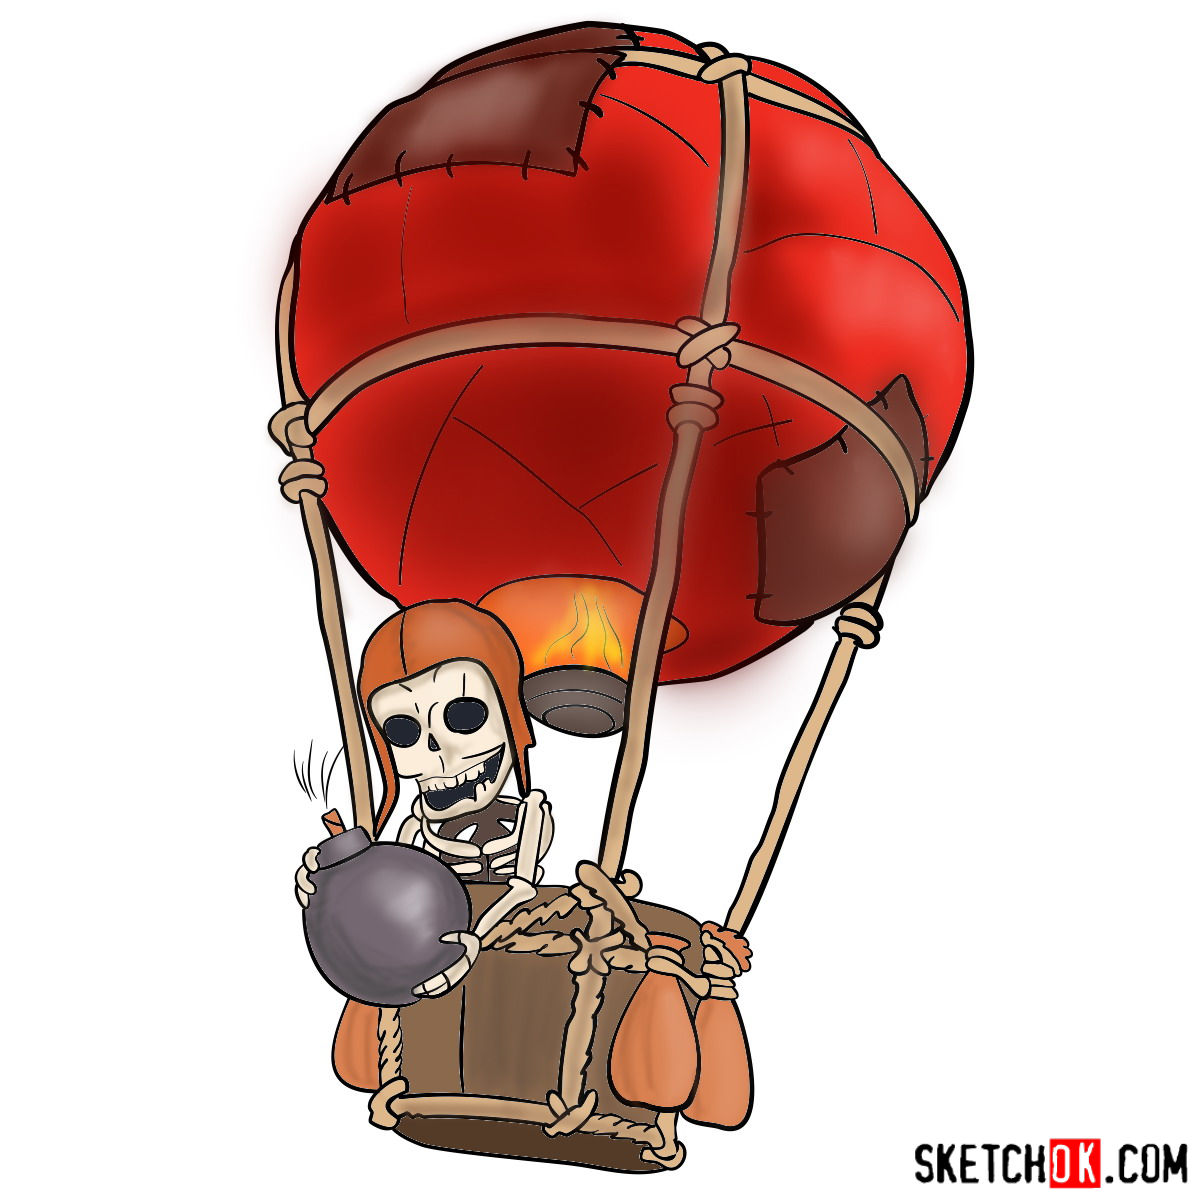 How to draw Balloon with a skeleton